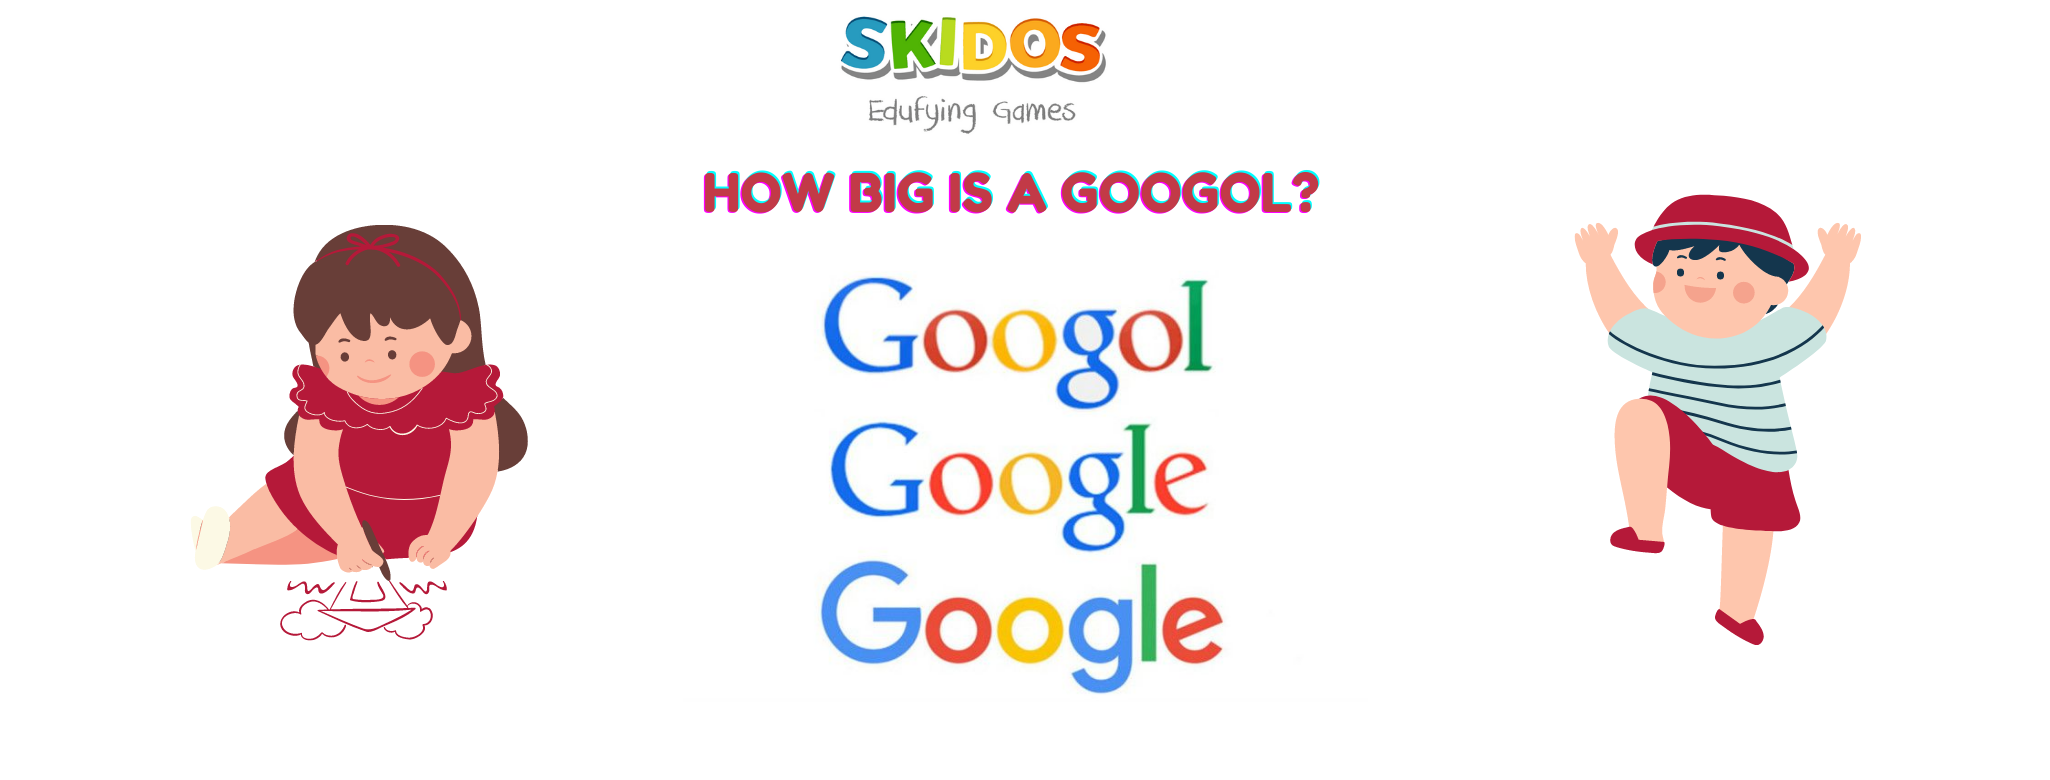 what is a googol